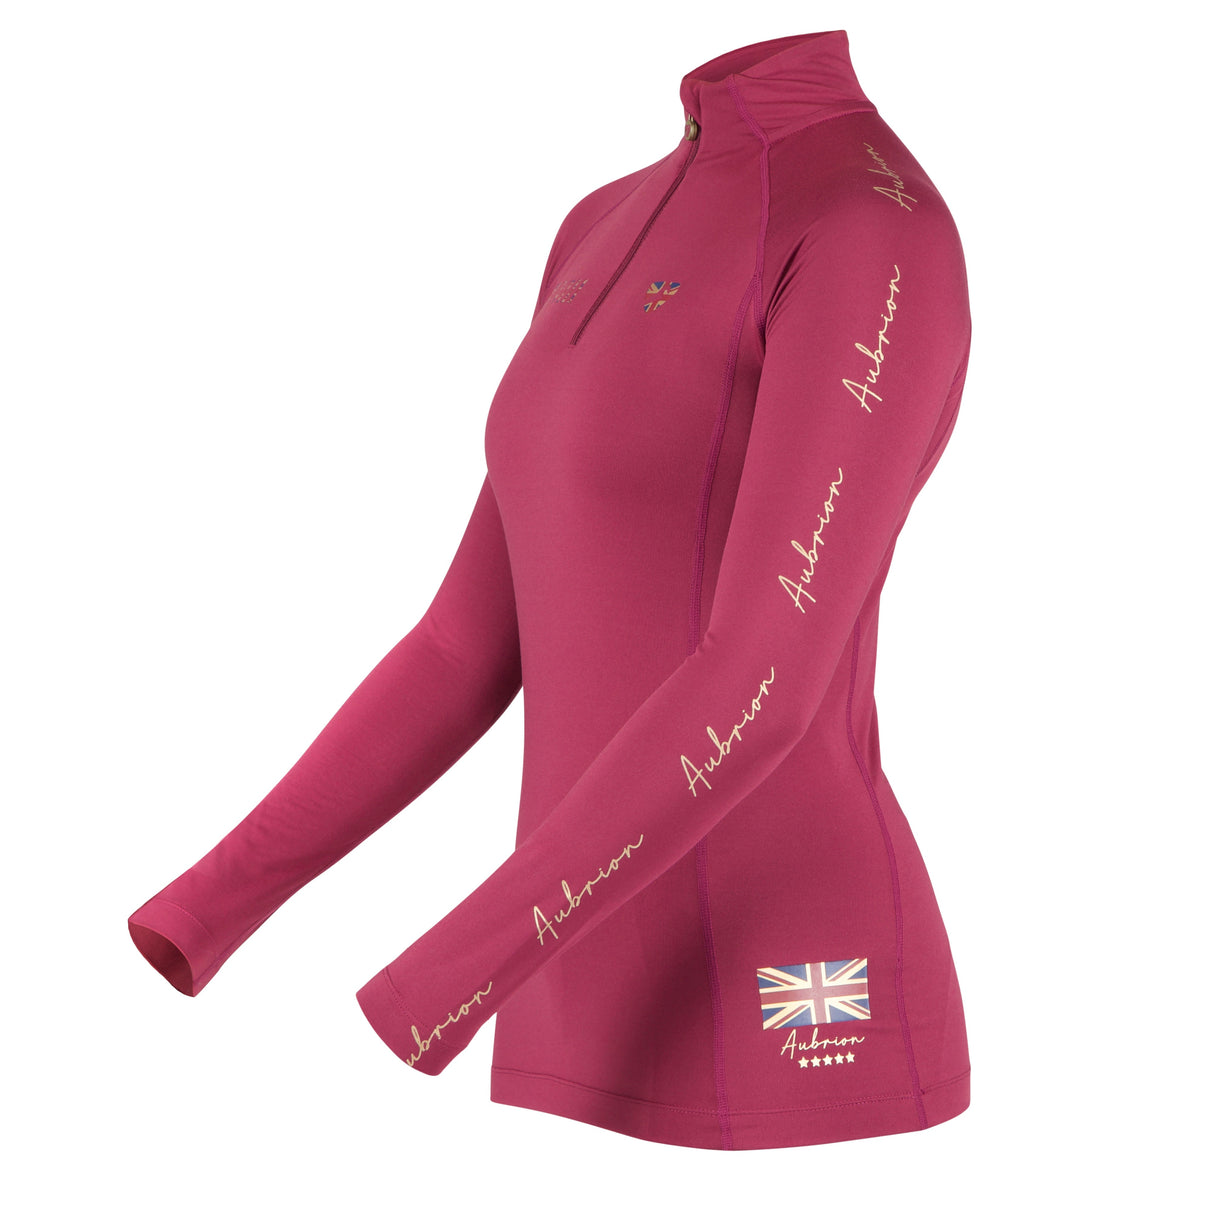 Shires Aubrion Team Long Sleeve Ladies Base Layer #colour_mulberry